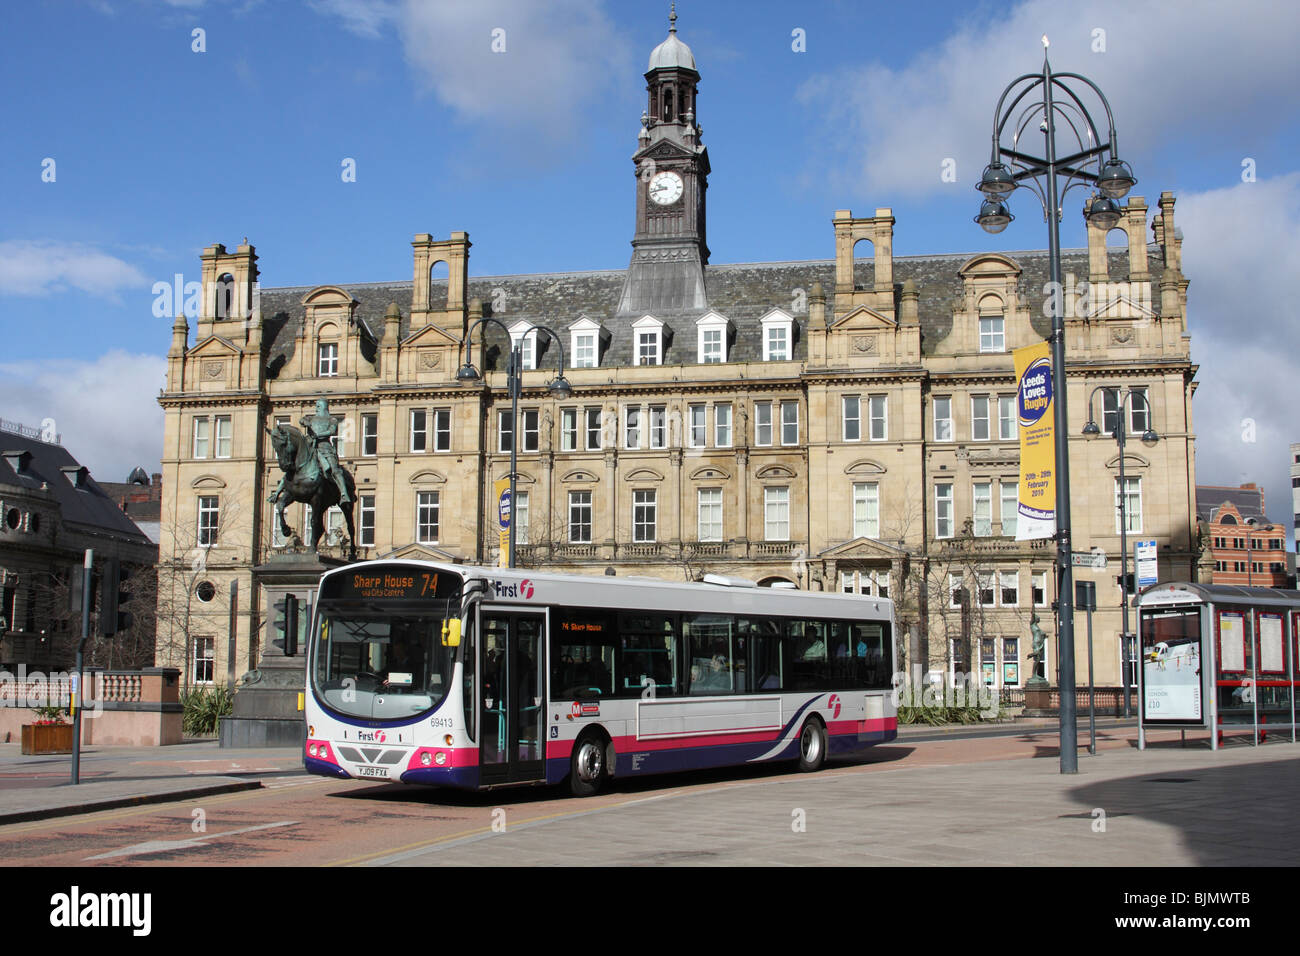 A First Group bus, City Square, Leeds, West Yorkshire, England, U.K. Stock Photo